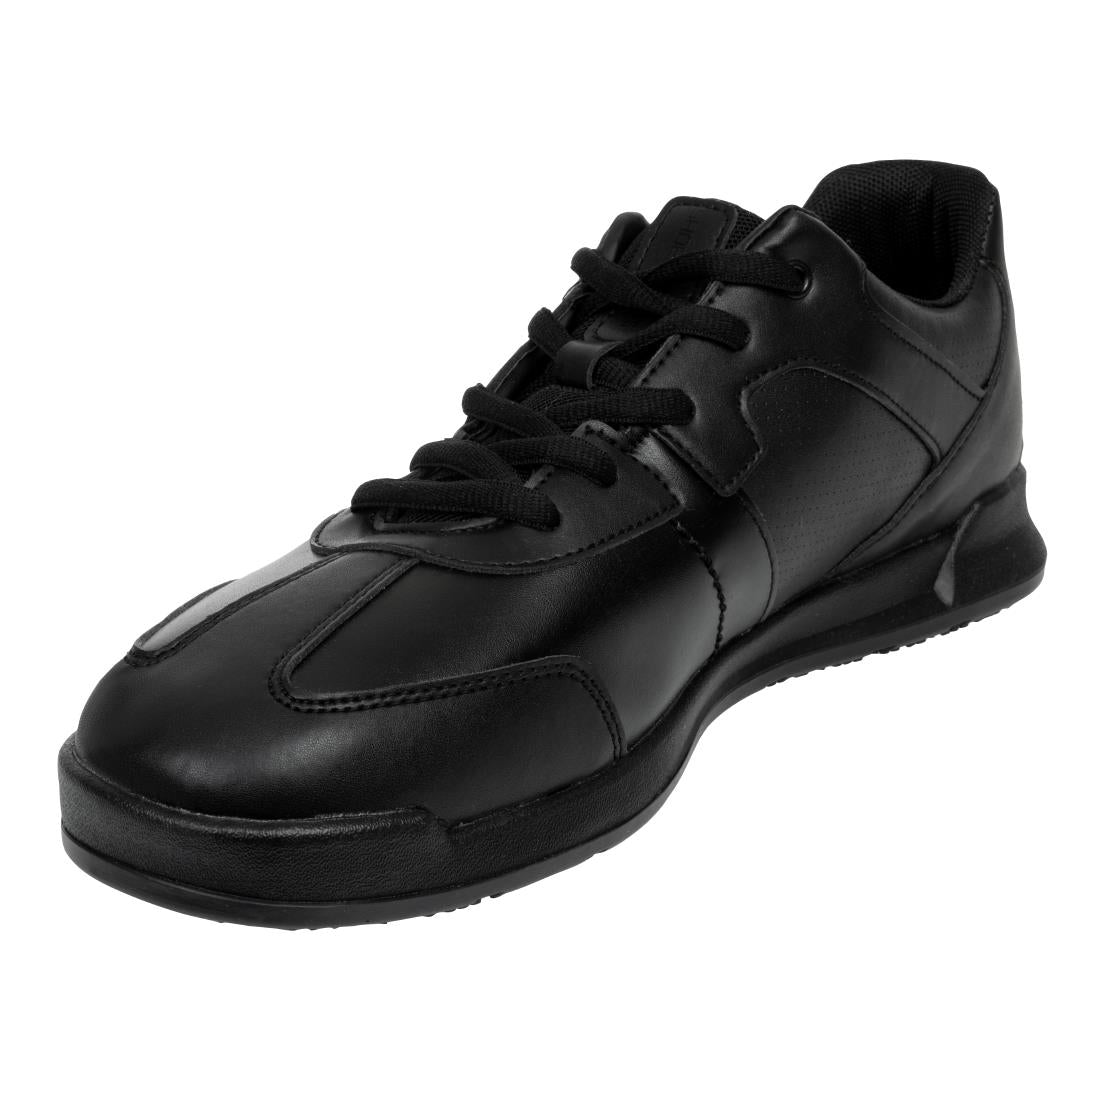 BB585-44 Shoes for Crews Freestyle Trainers Black Size 44